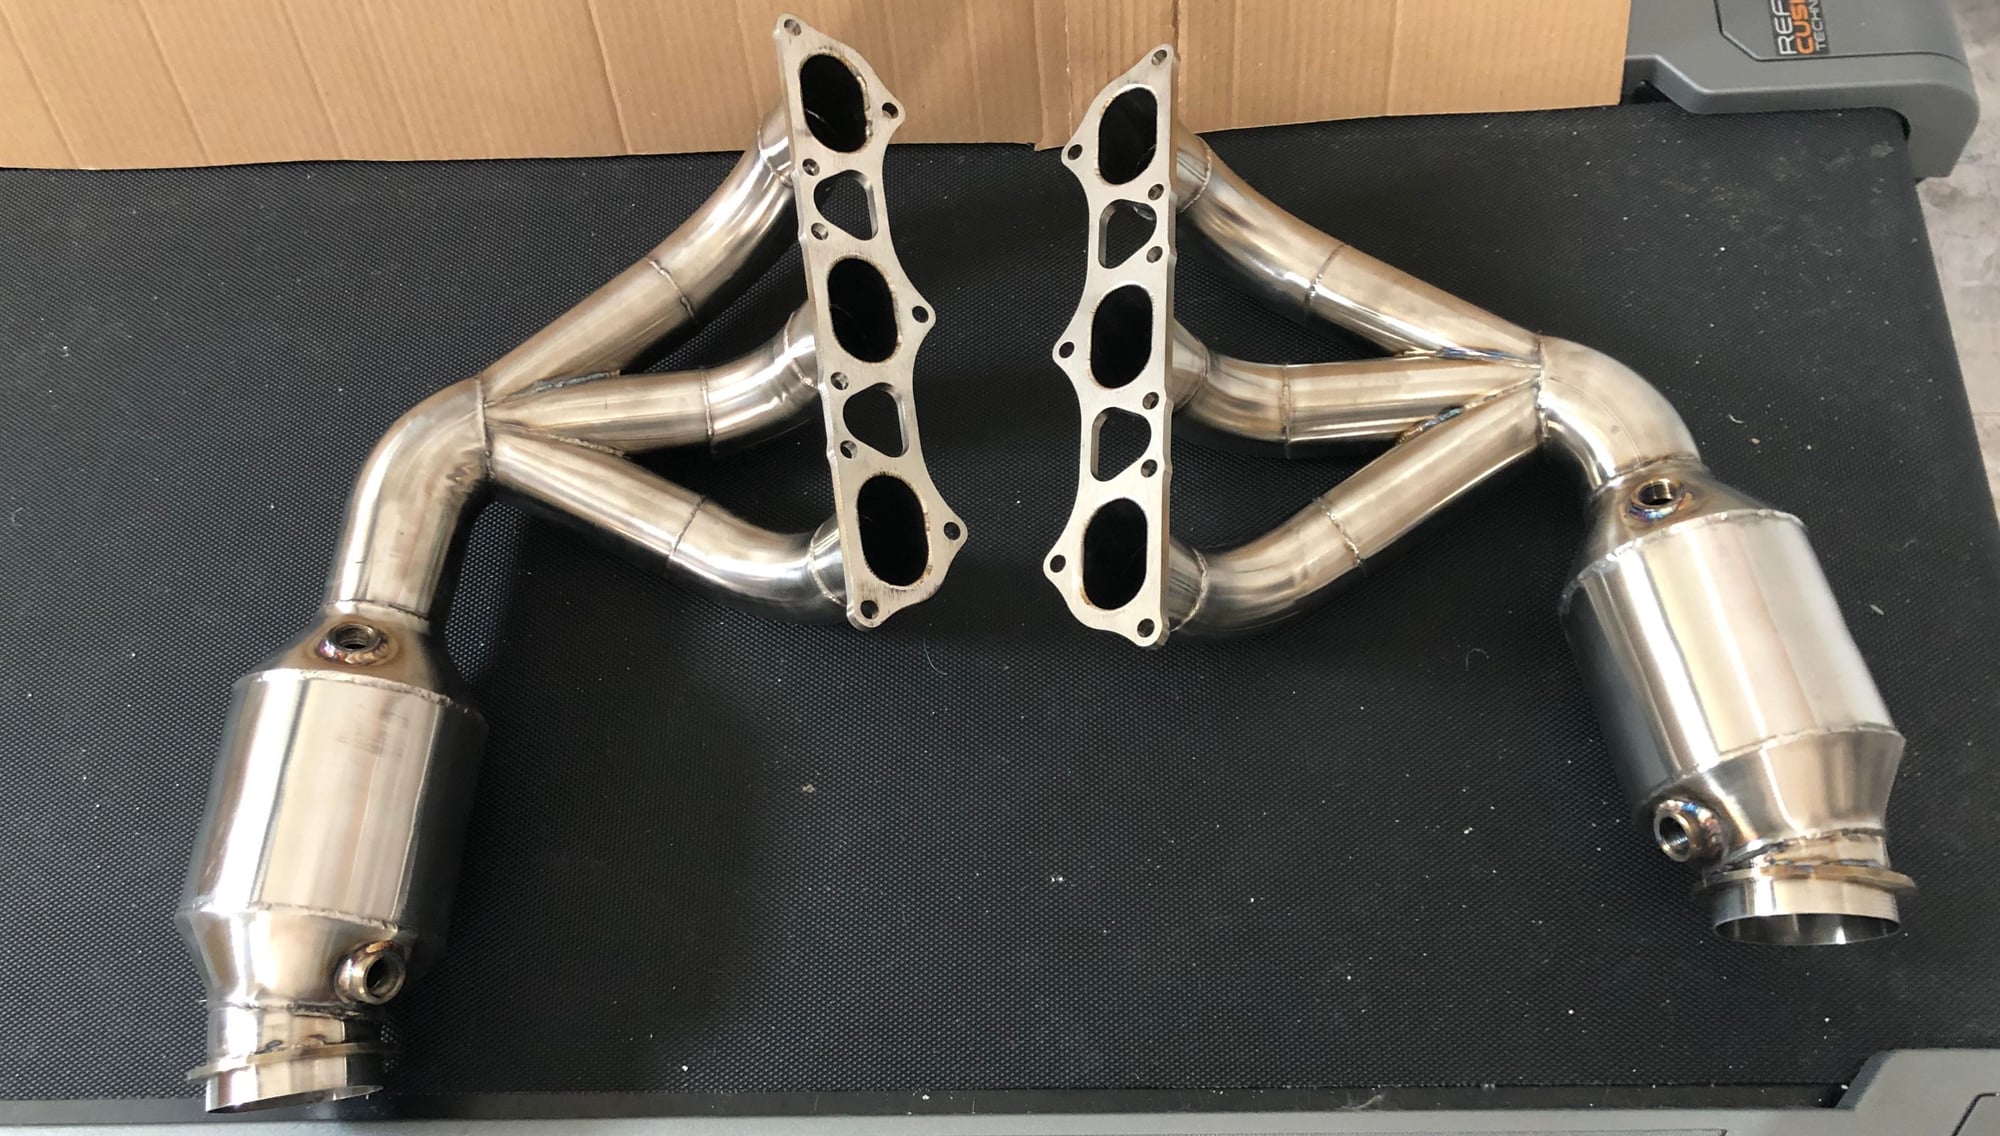 Engine - Exhaust - Complete Kline Inconel 625 991 GT3/RS Performance Exhaust System w/Kline Manifolds - New - Springfield Gardens, NY 11413, United States